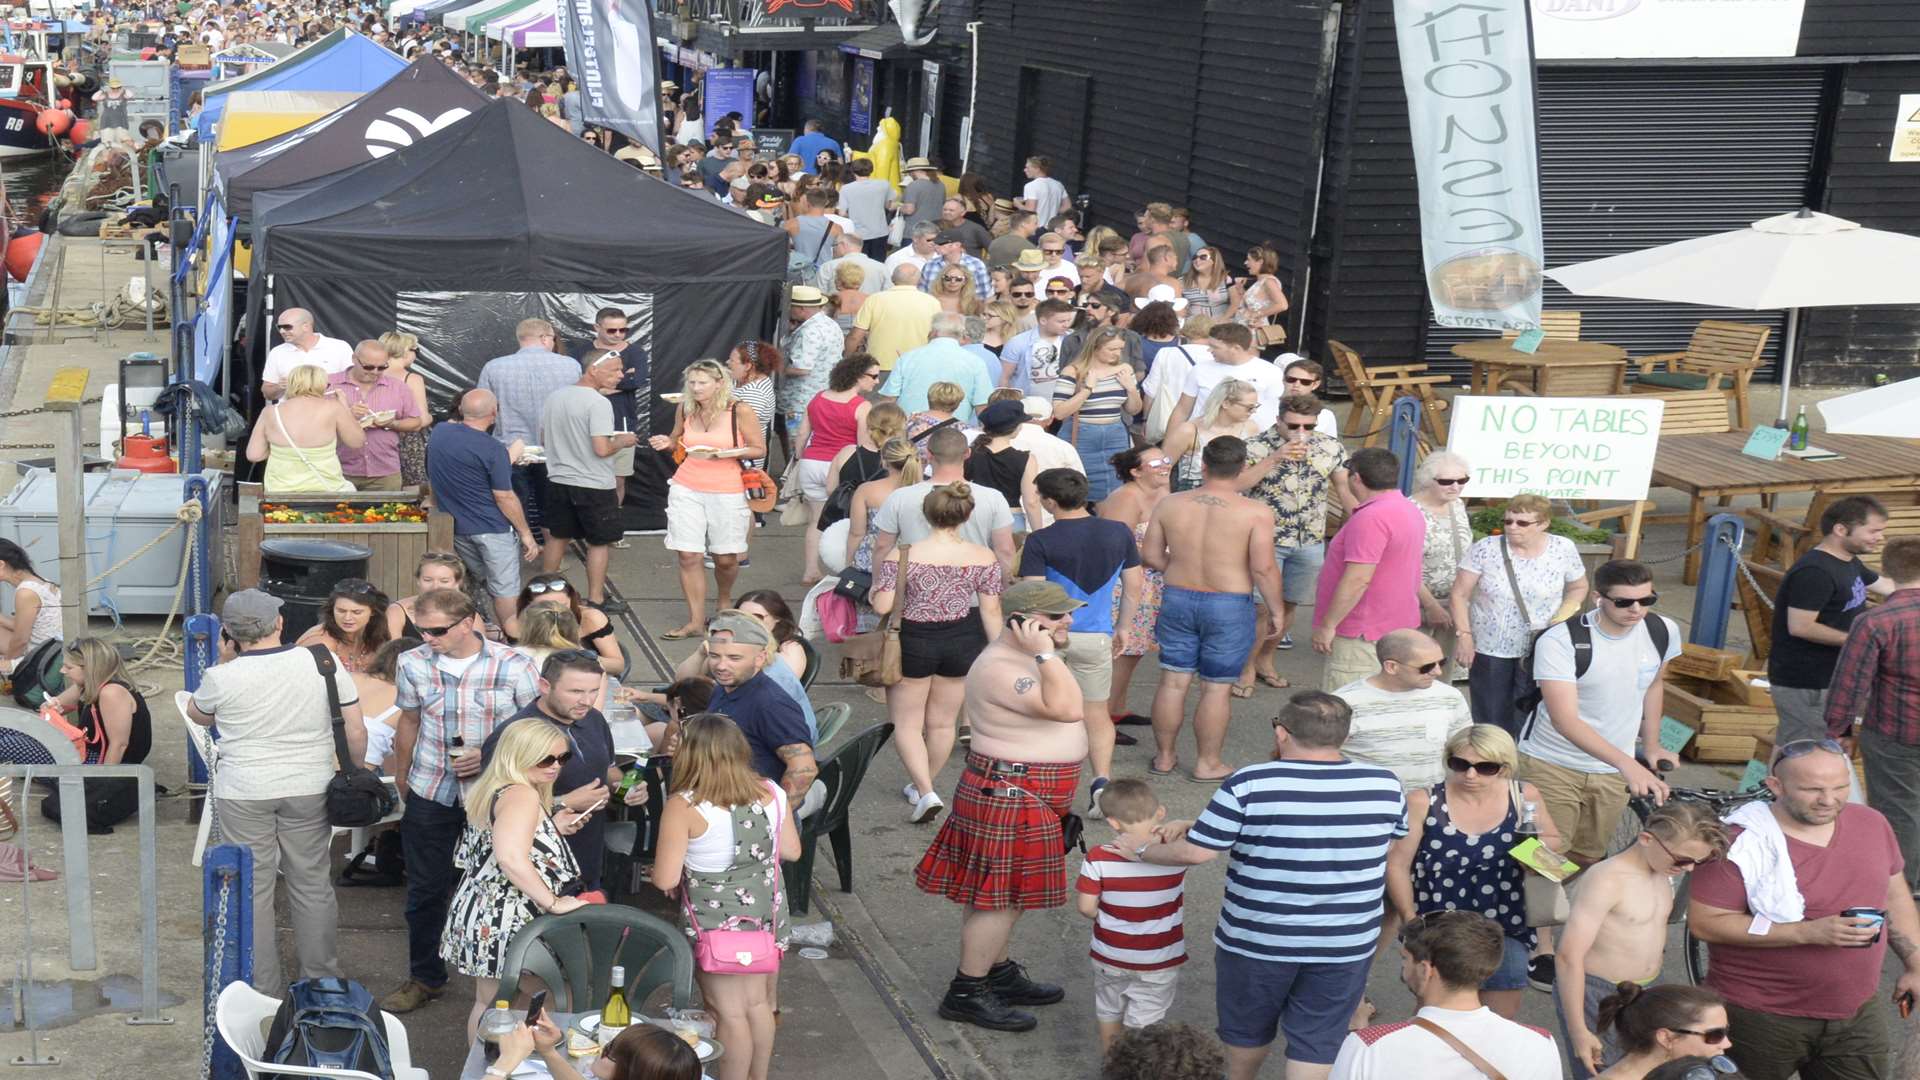 There were complaints last year's Whitstable Oyster Festival was too crowded